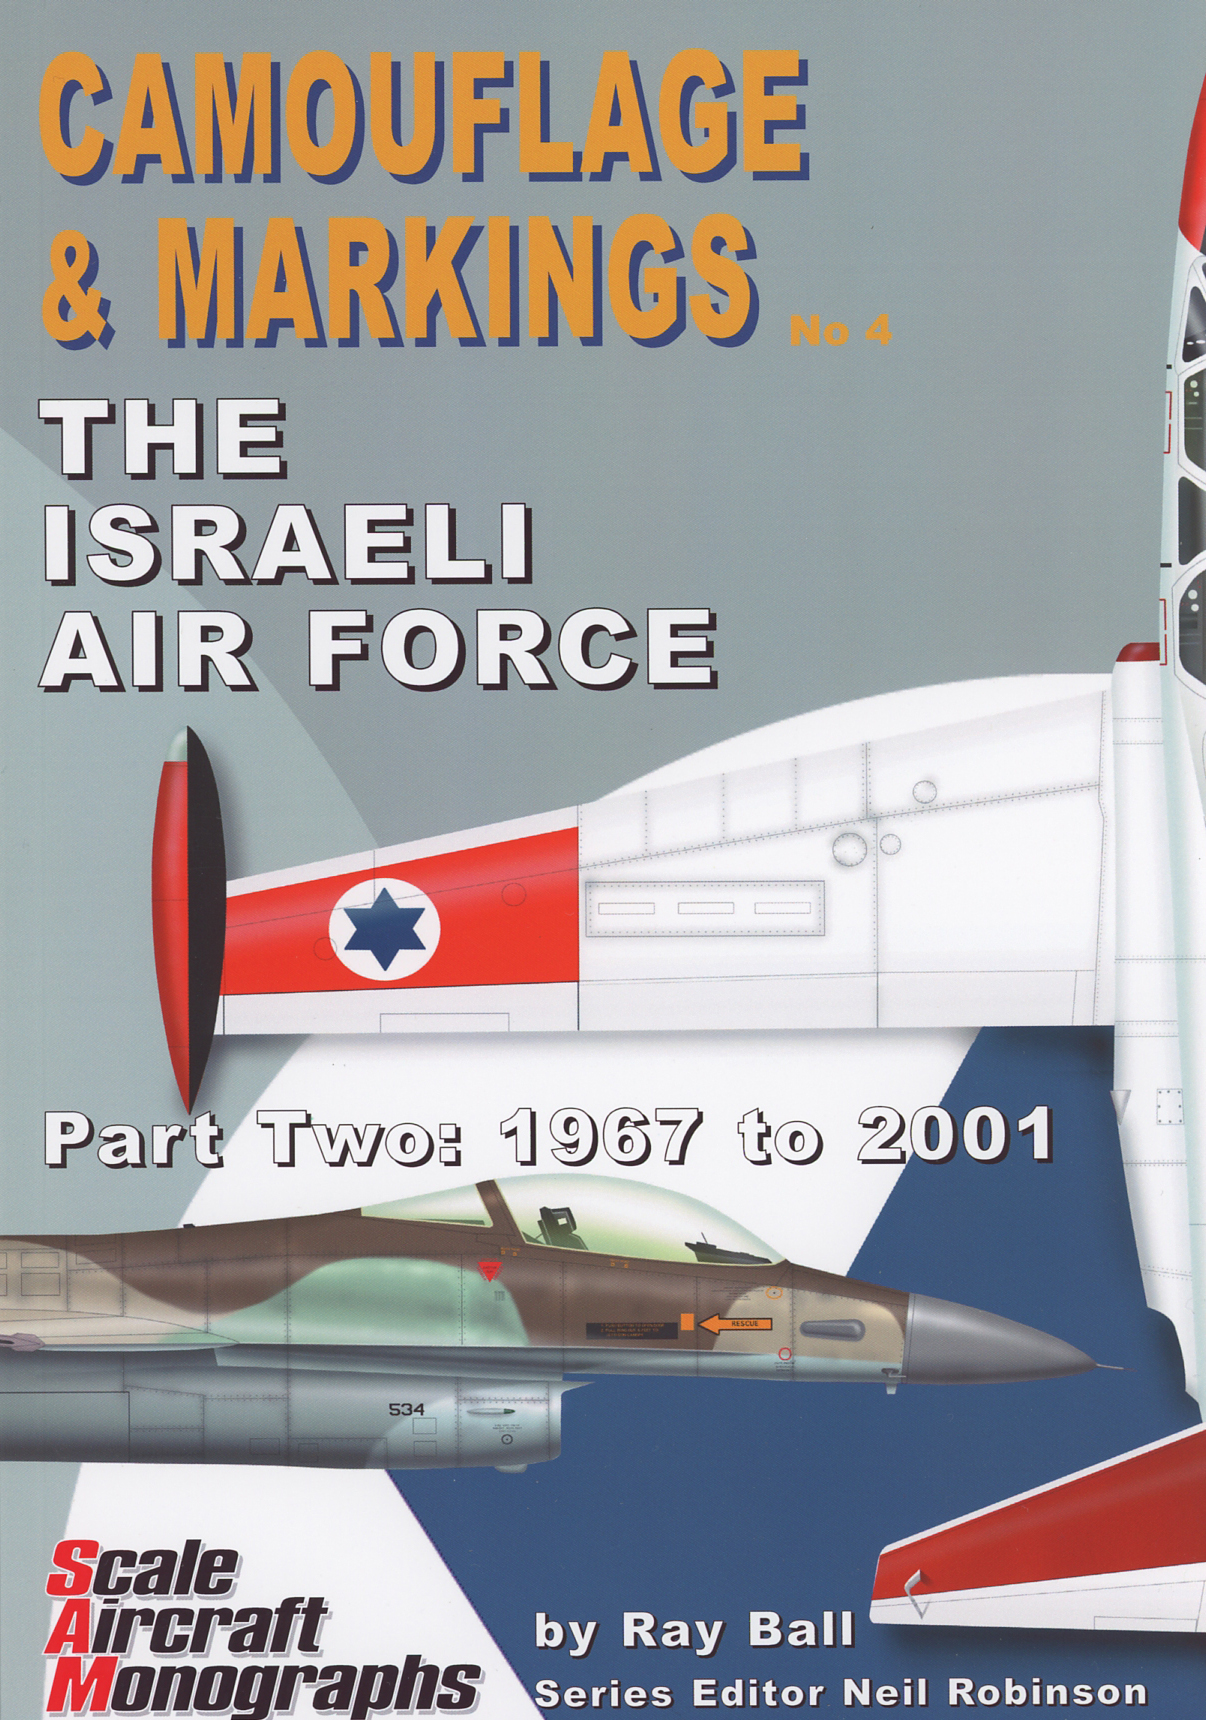 Guideline Publications Camouflage & Markings 4 The Israeli Air Force Part 2: 1967-2001 by Ray Ball 